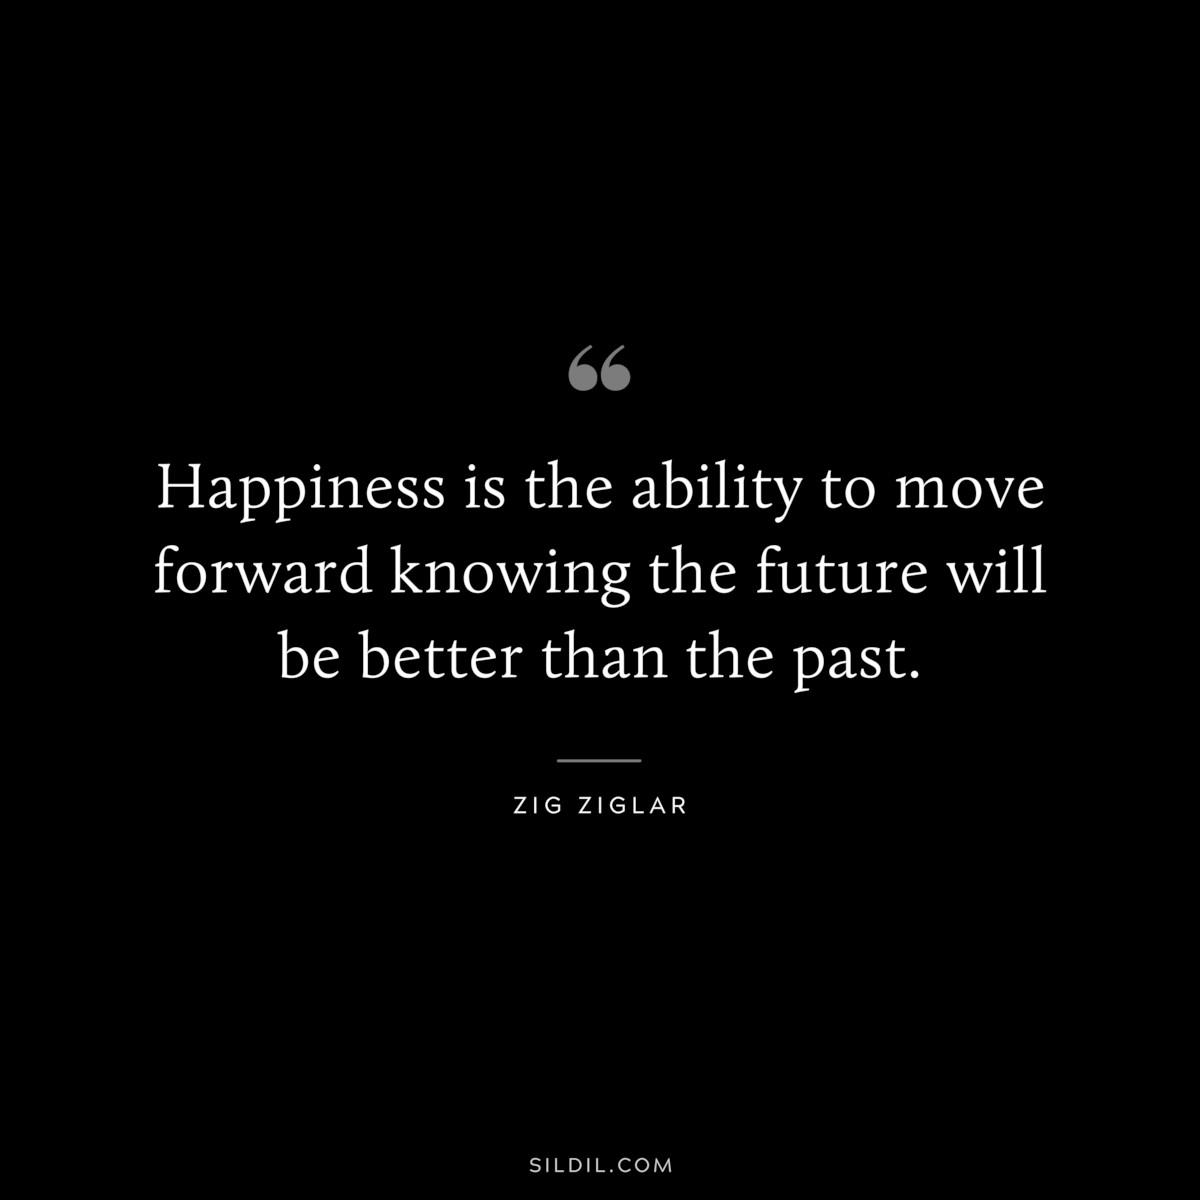 Happiness is the ability to move forward knowing the future will be better than the past. ― Zig Ziglar